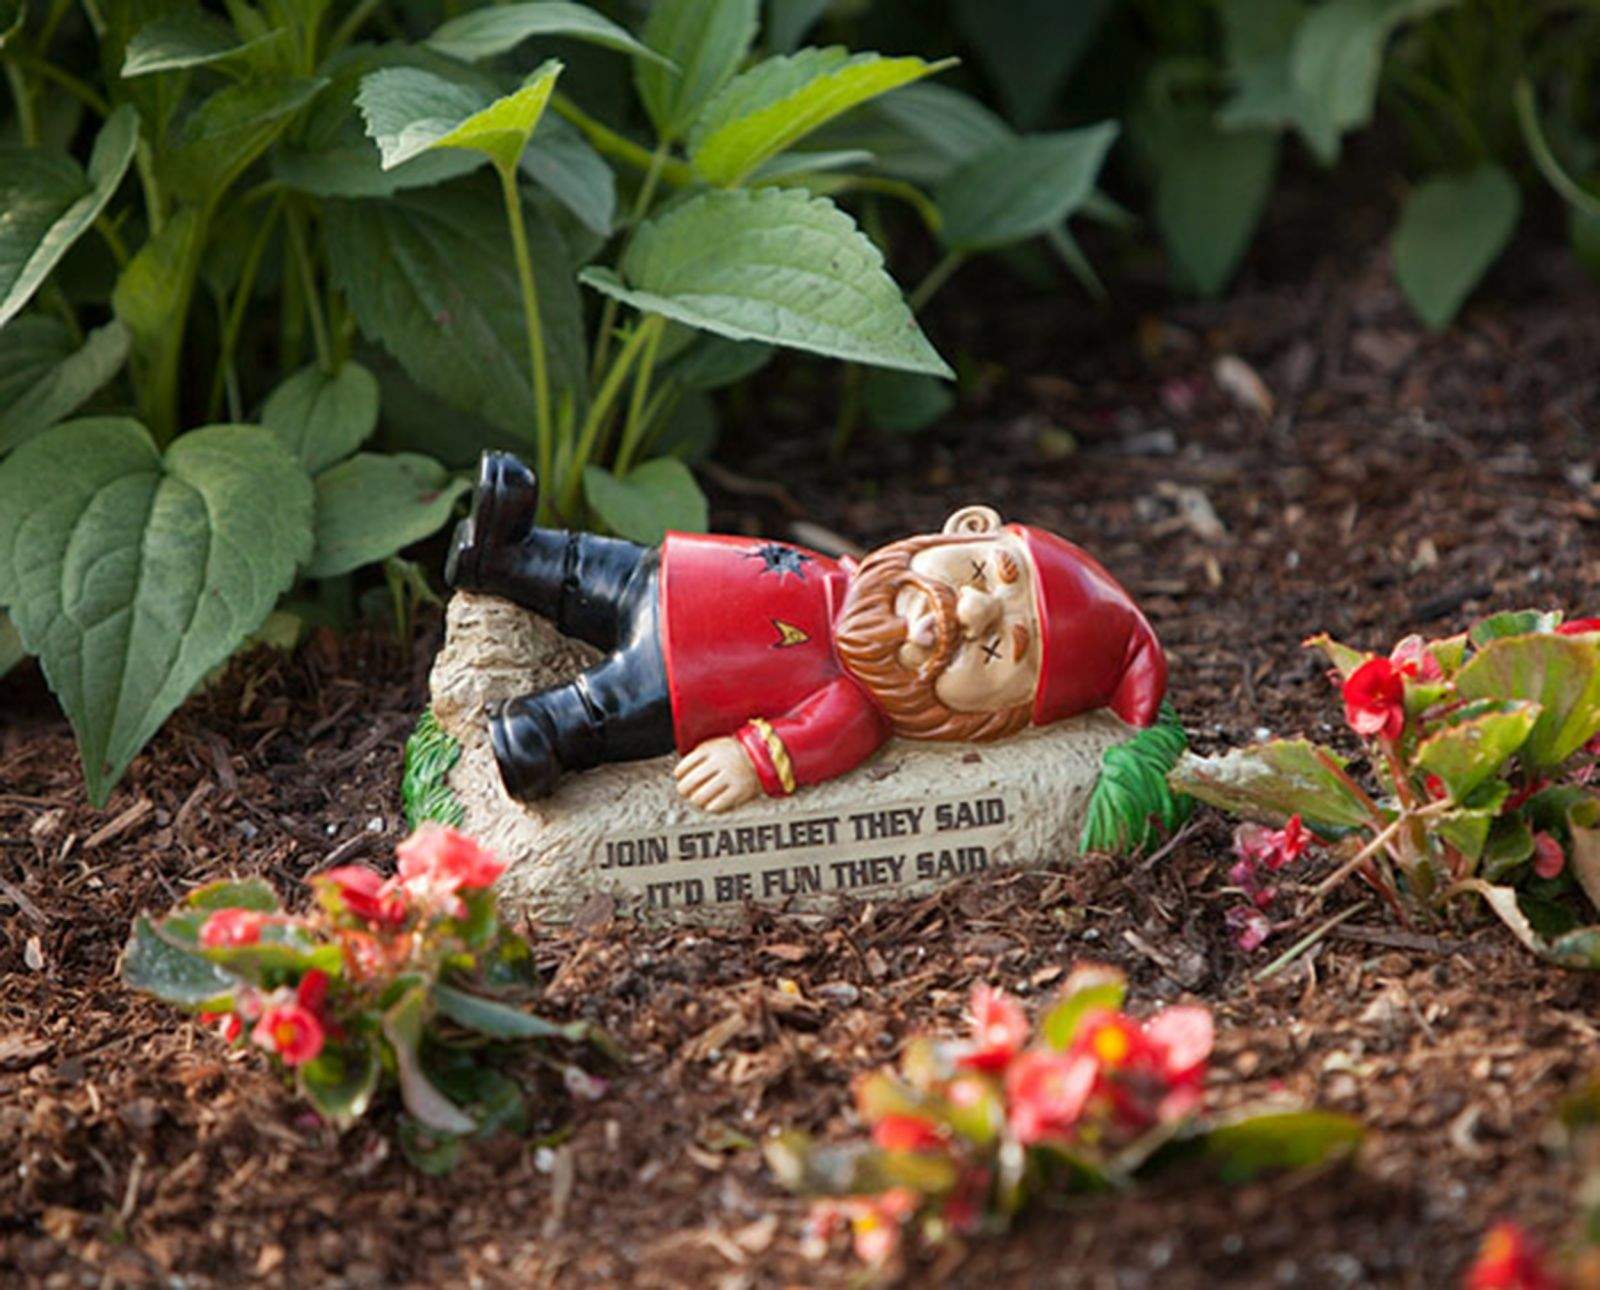 Even in a red shirt, a garden gnome is not safe.